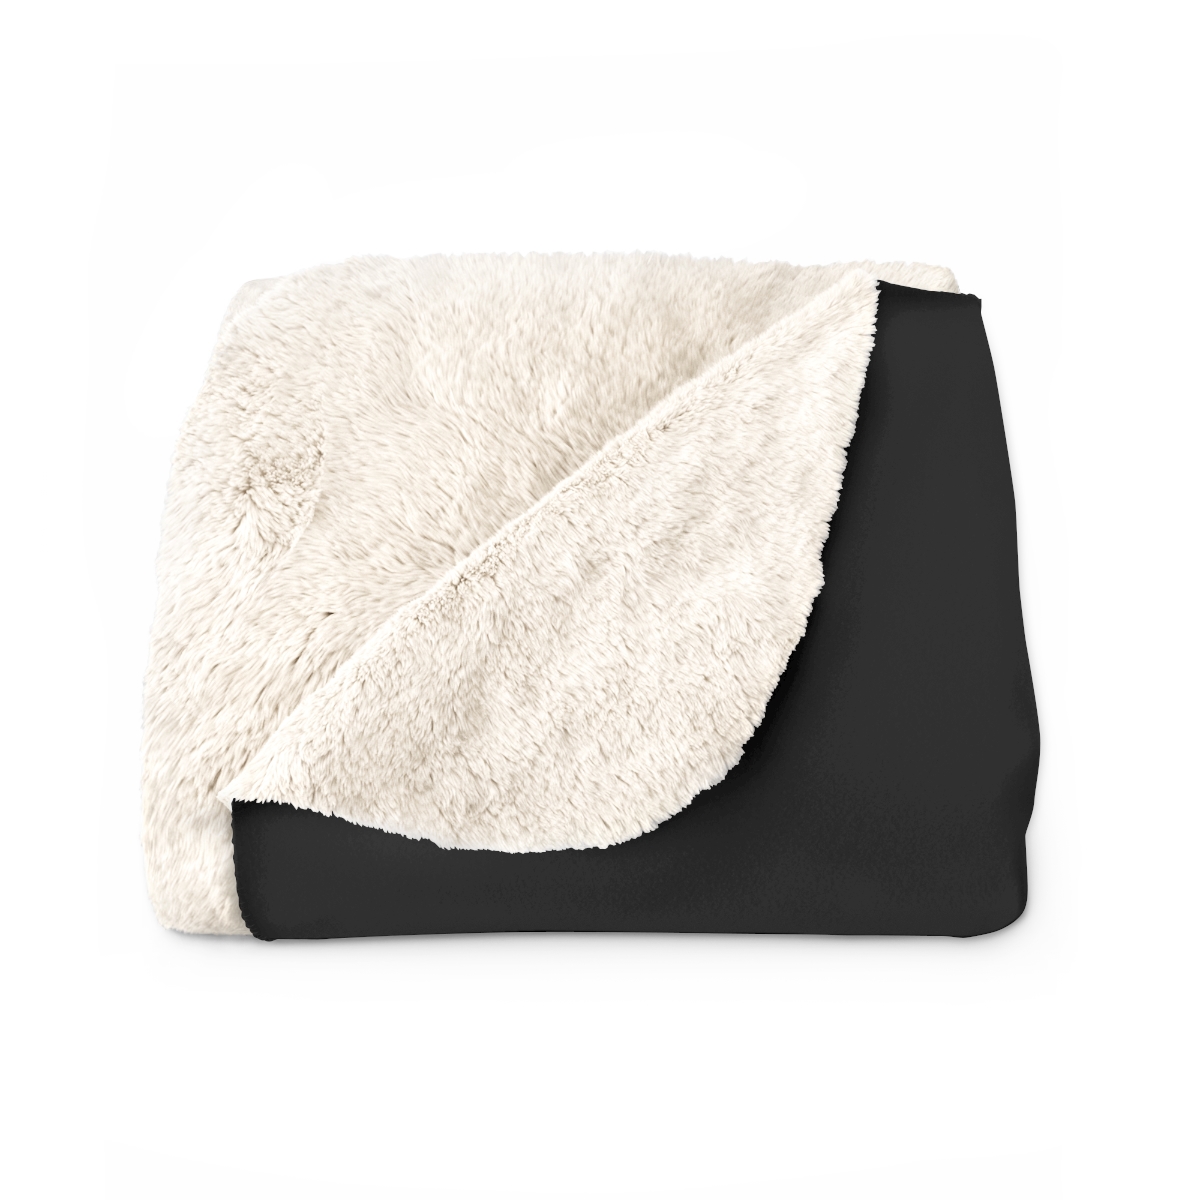 SCA More than a Hobby Sherpa Fleece Blanket product thumbnail image